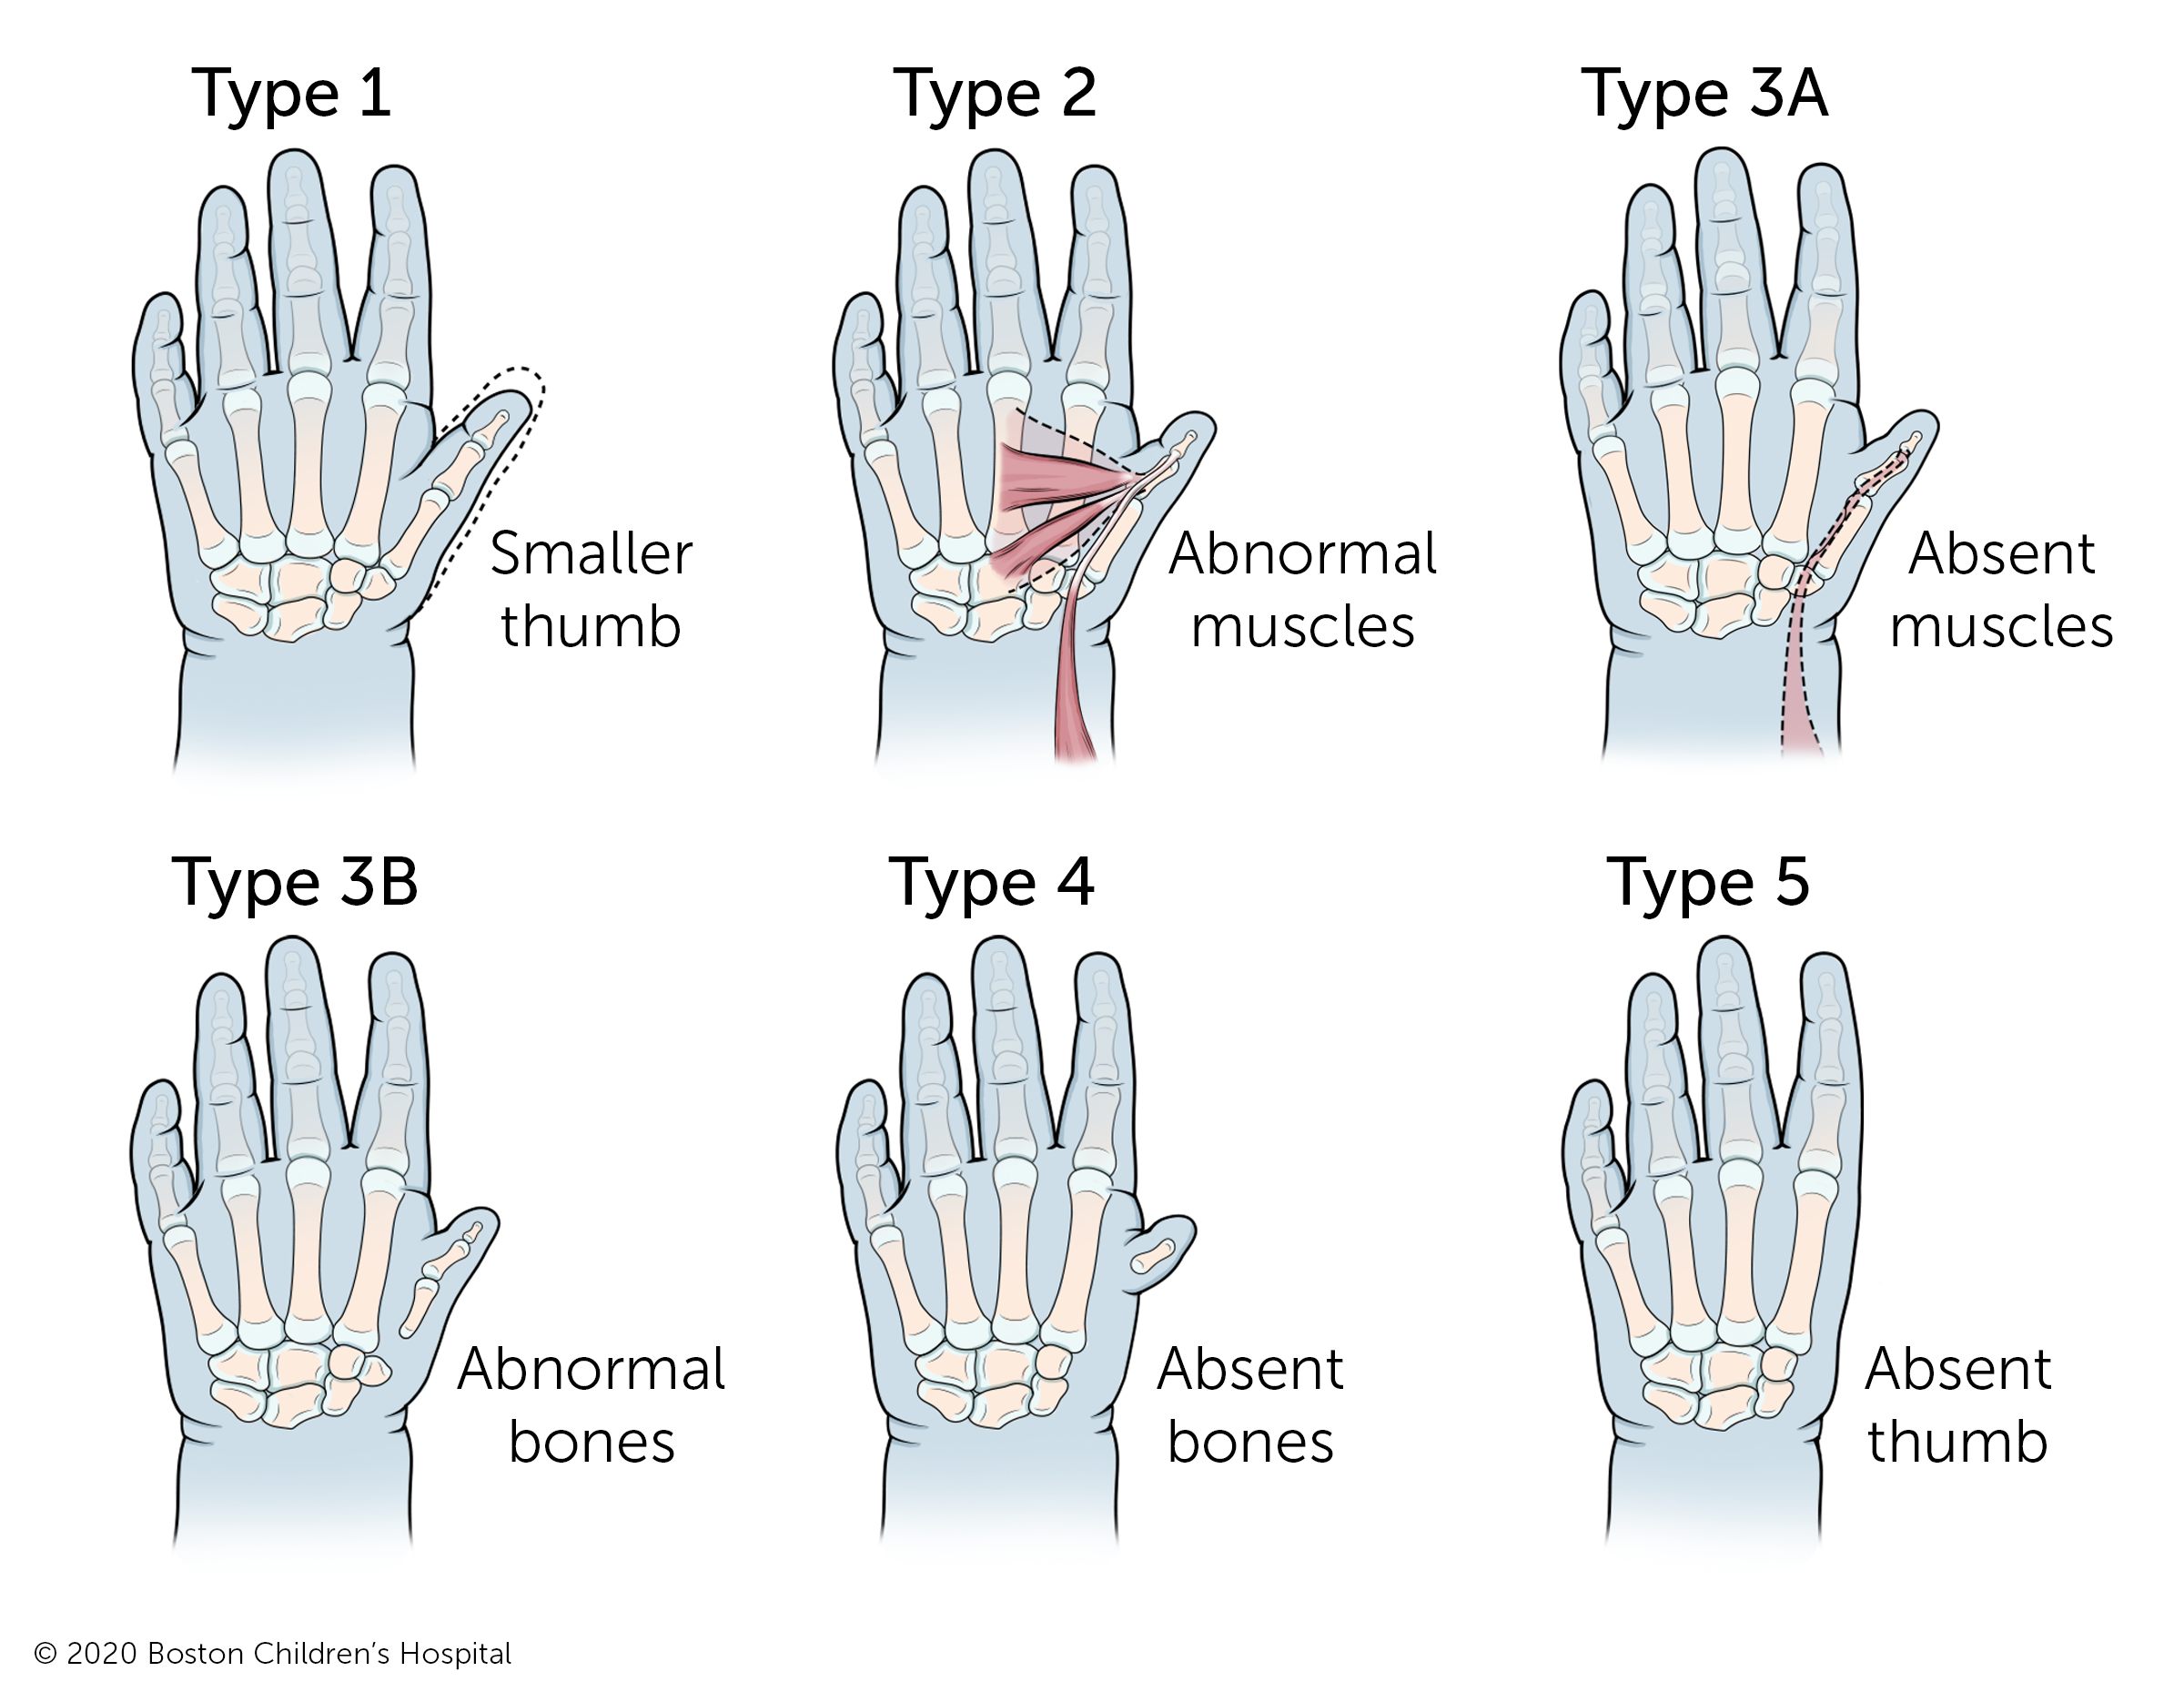 Five types of thumb hypoplasia. In type 1, the thumb is smaller. In type 2, the thumb has abnormal muscles. In type 3A, the muscles of the thumb are absent. In type 3B, the bones of the thumb are abnormal. In type 4, the bones of the thumb are absent. In type 5, the thumb is completely absent.